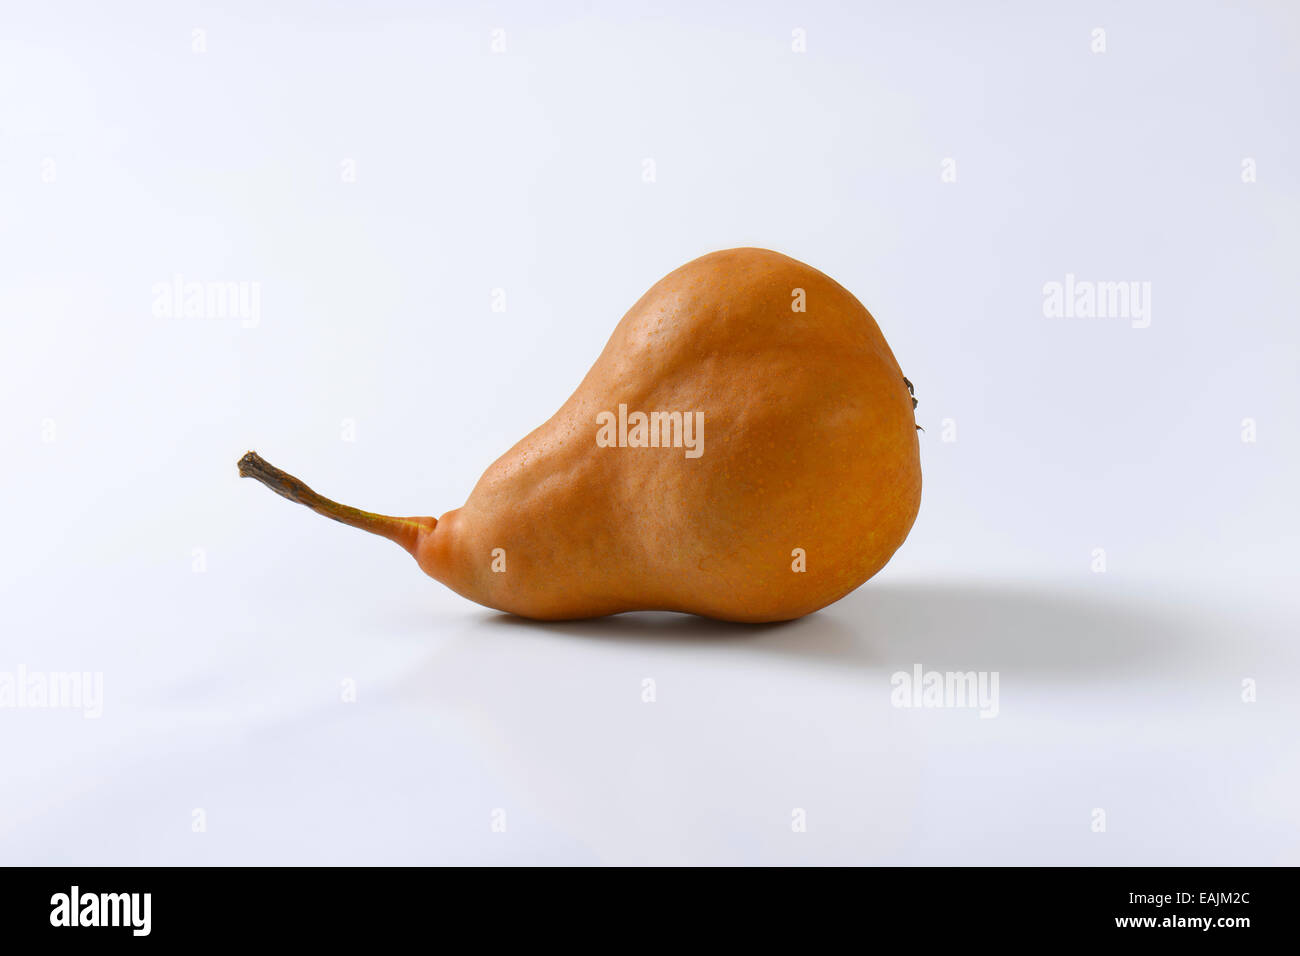 European pear with elongated slender neck and russeted skin Stock Photo